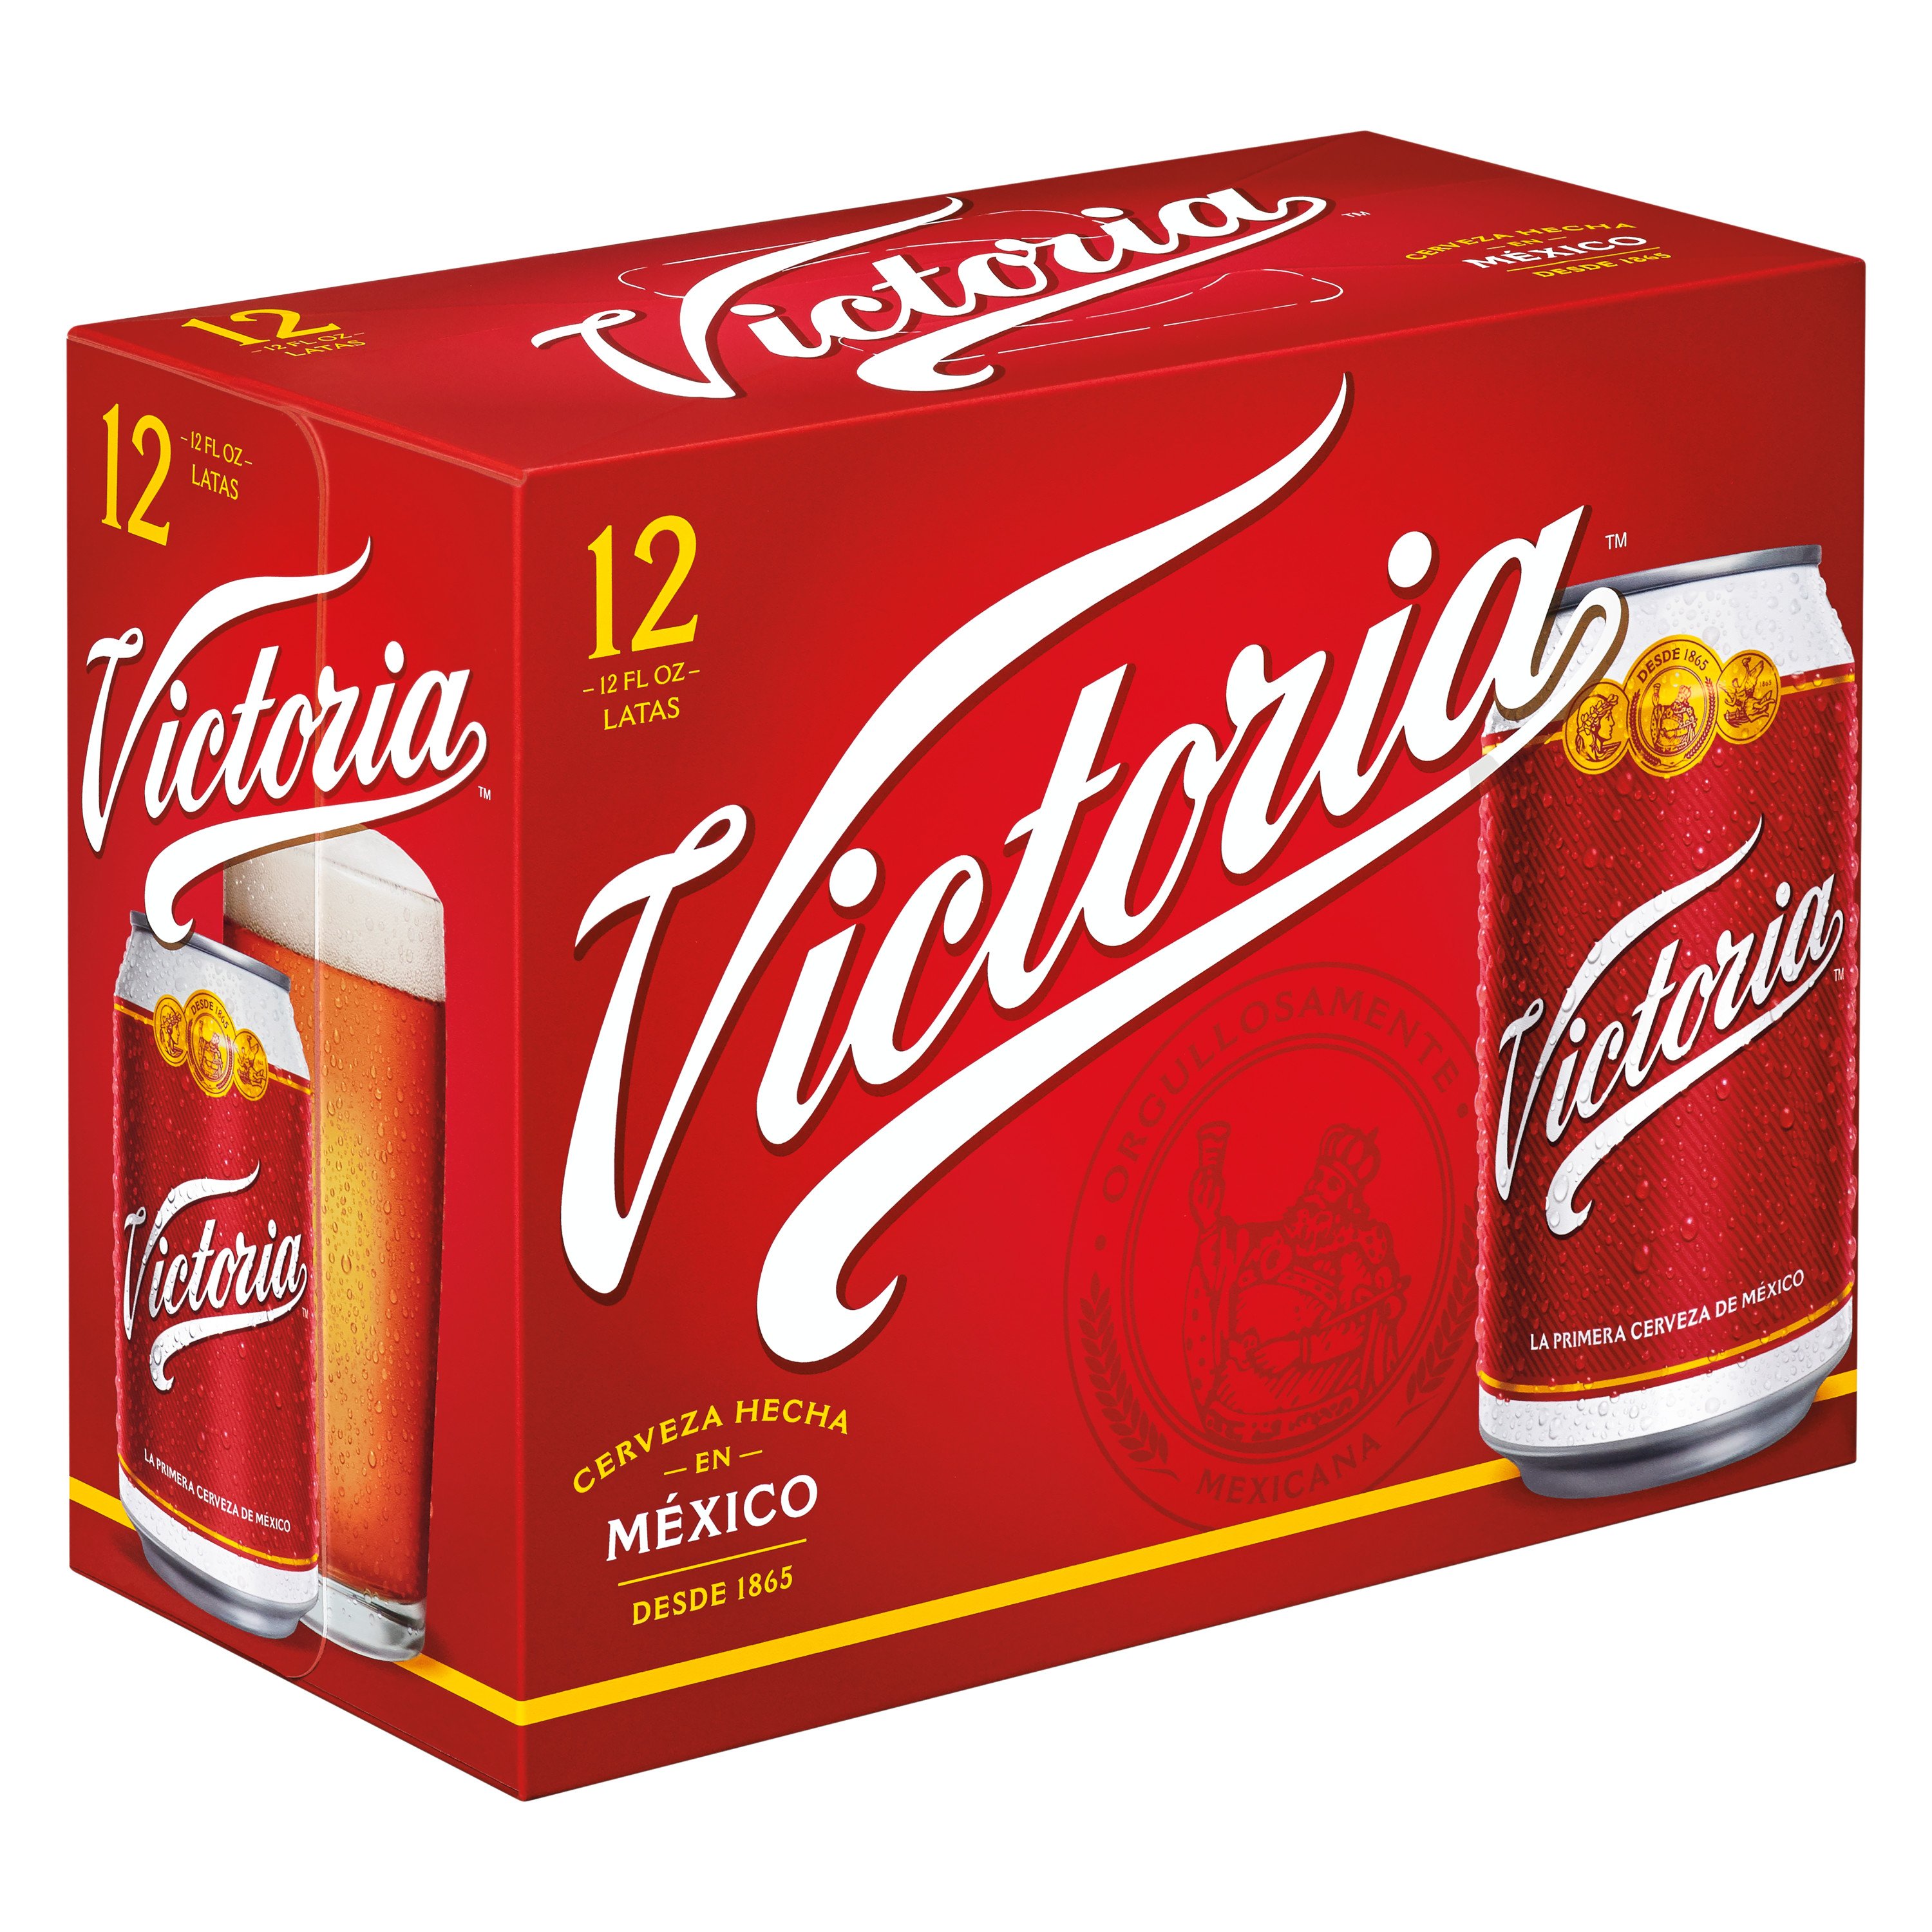 Victoria Amber Lager Mexican Beer 12 Oz Cans 12 Pk Shop Beer At H E B 7295